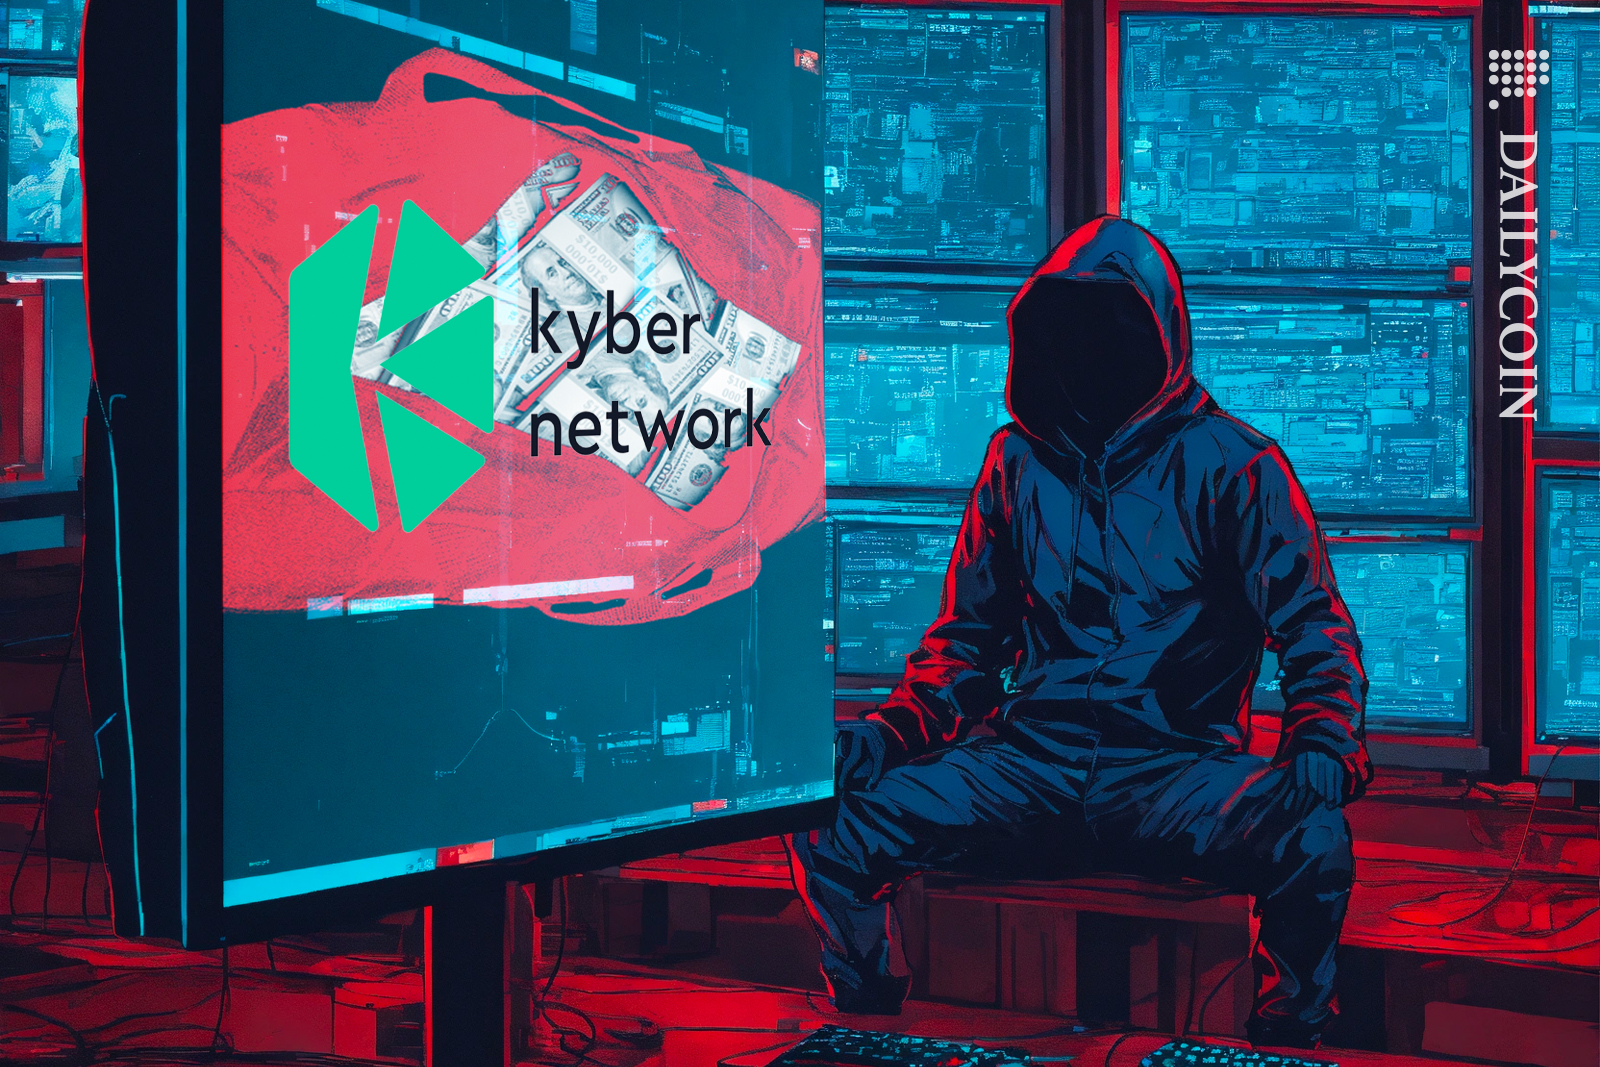 Kyber network hacker considering answering to the bounty offer.